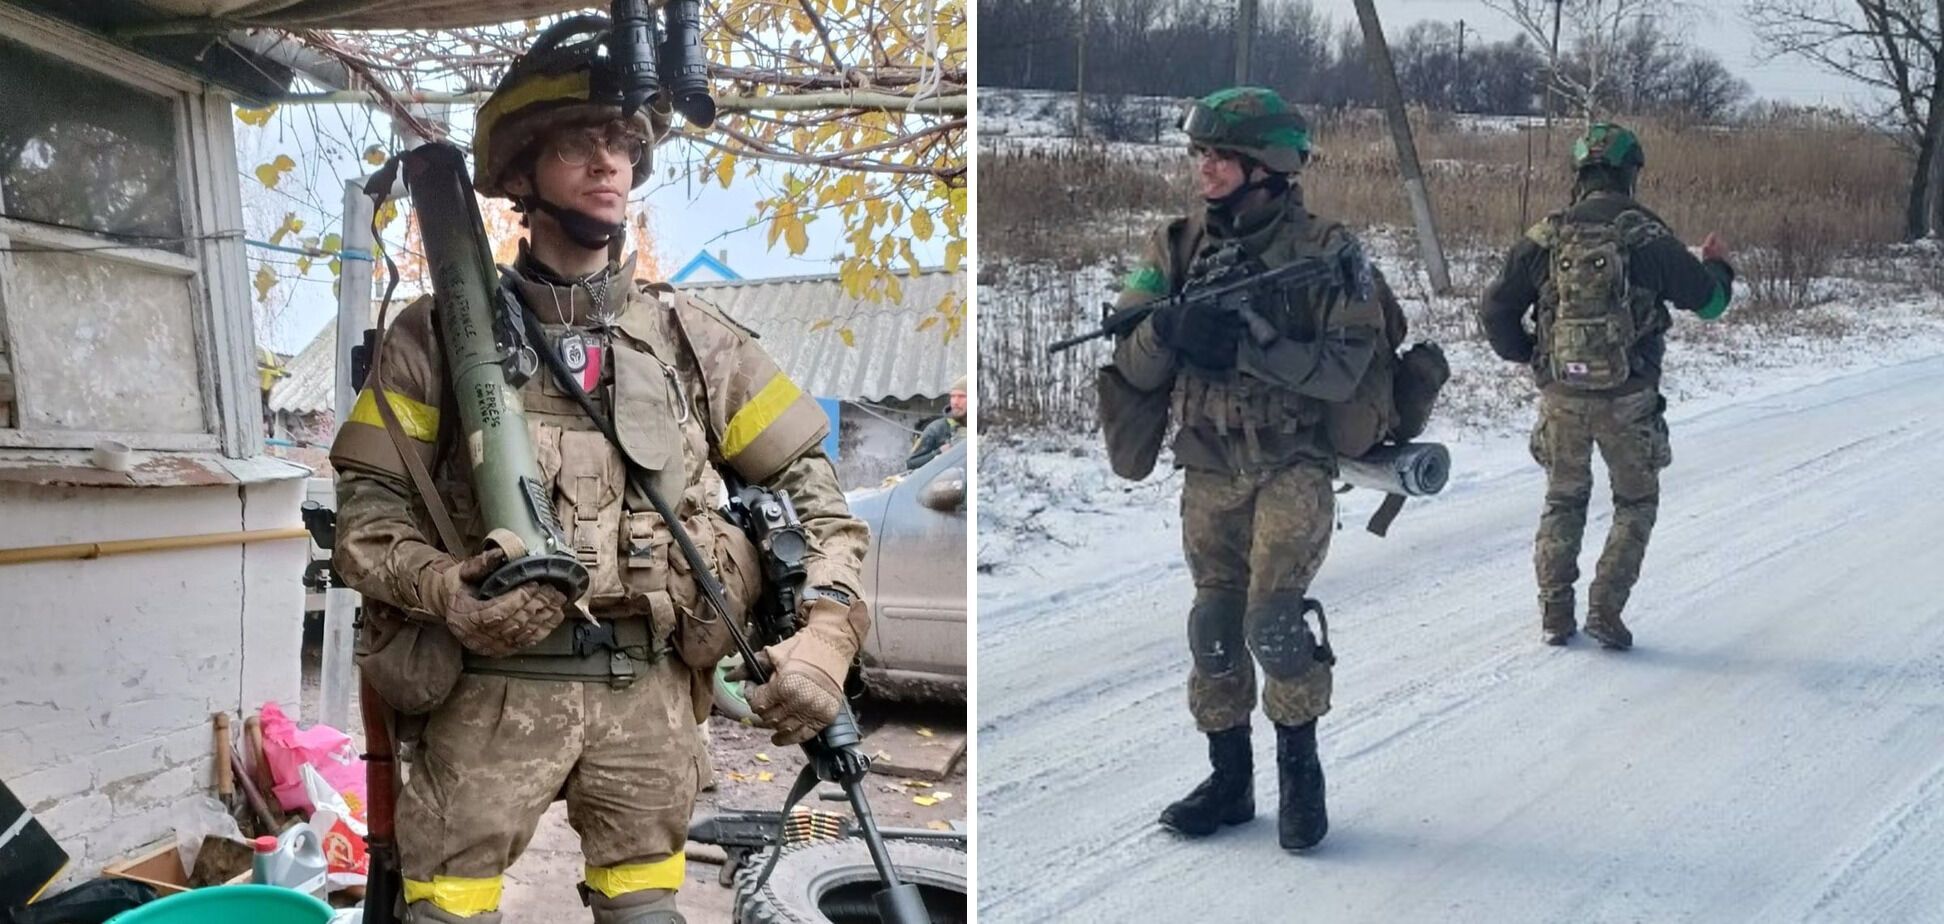 ''Only a miracle could have saved me'': the network was struck by the farewell note of a 22-year-old Frenchman who died in the fighting for Ukraine. Photo